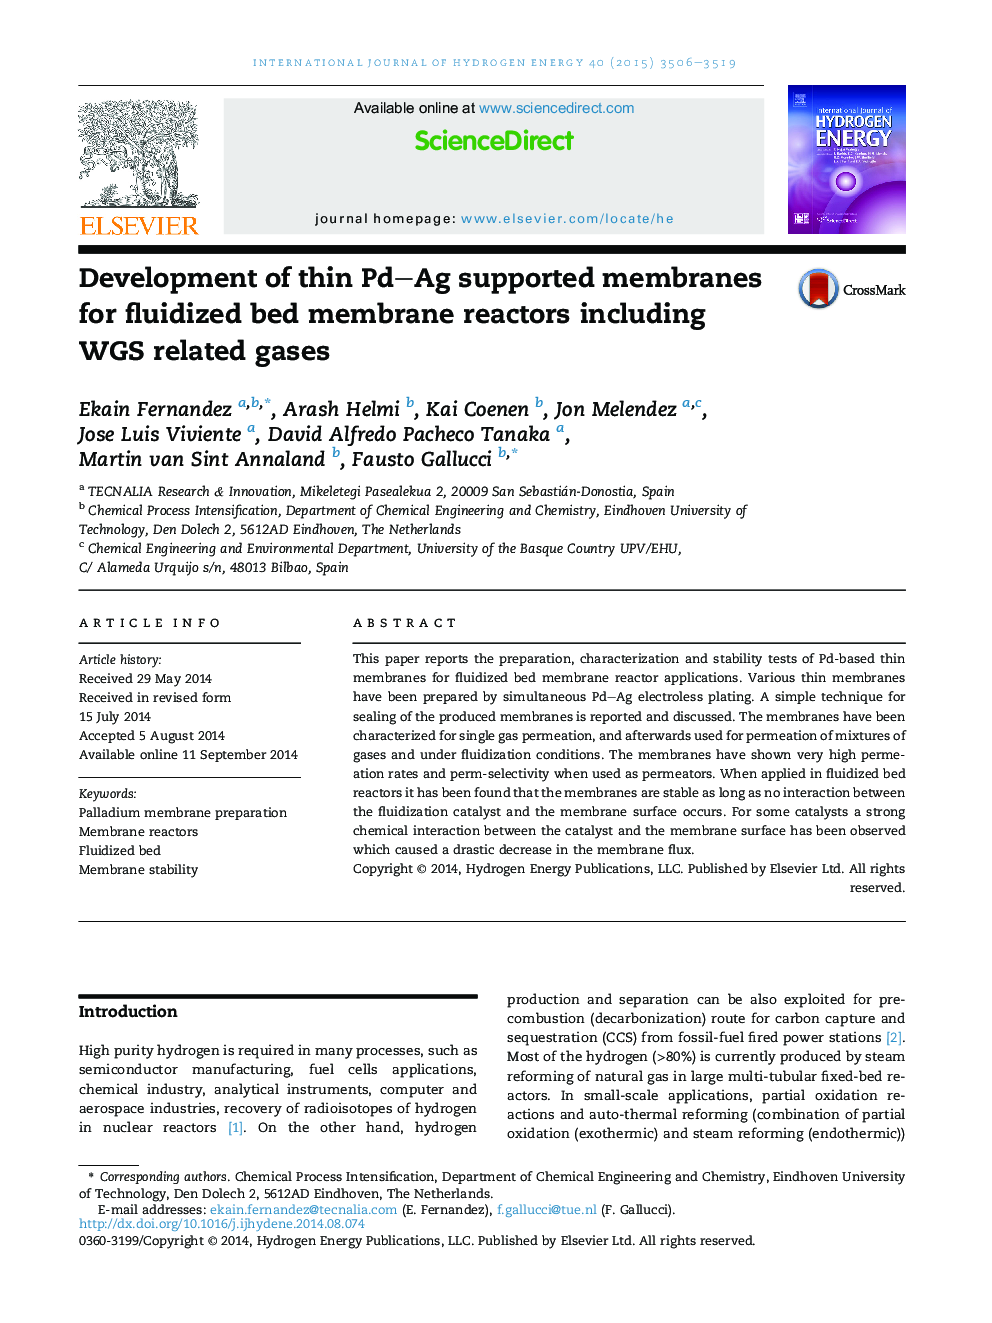 Development of thin Pd–Ag supported membranes for fluidized bed membrane reactors including WGS related gases